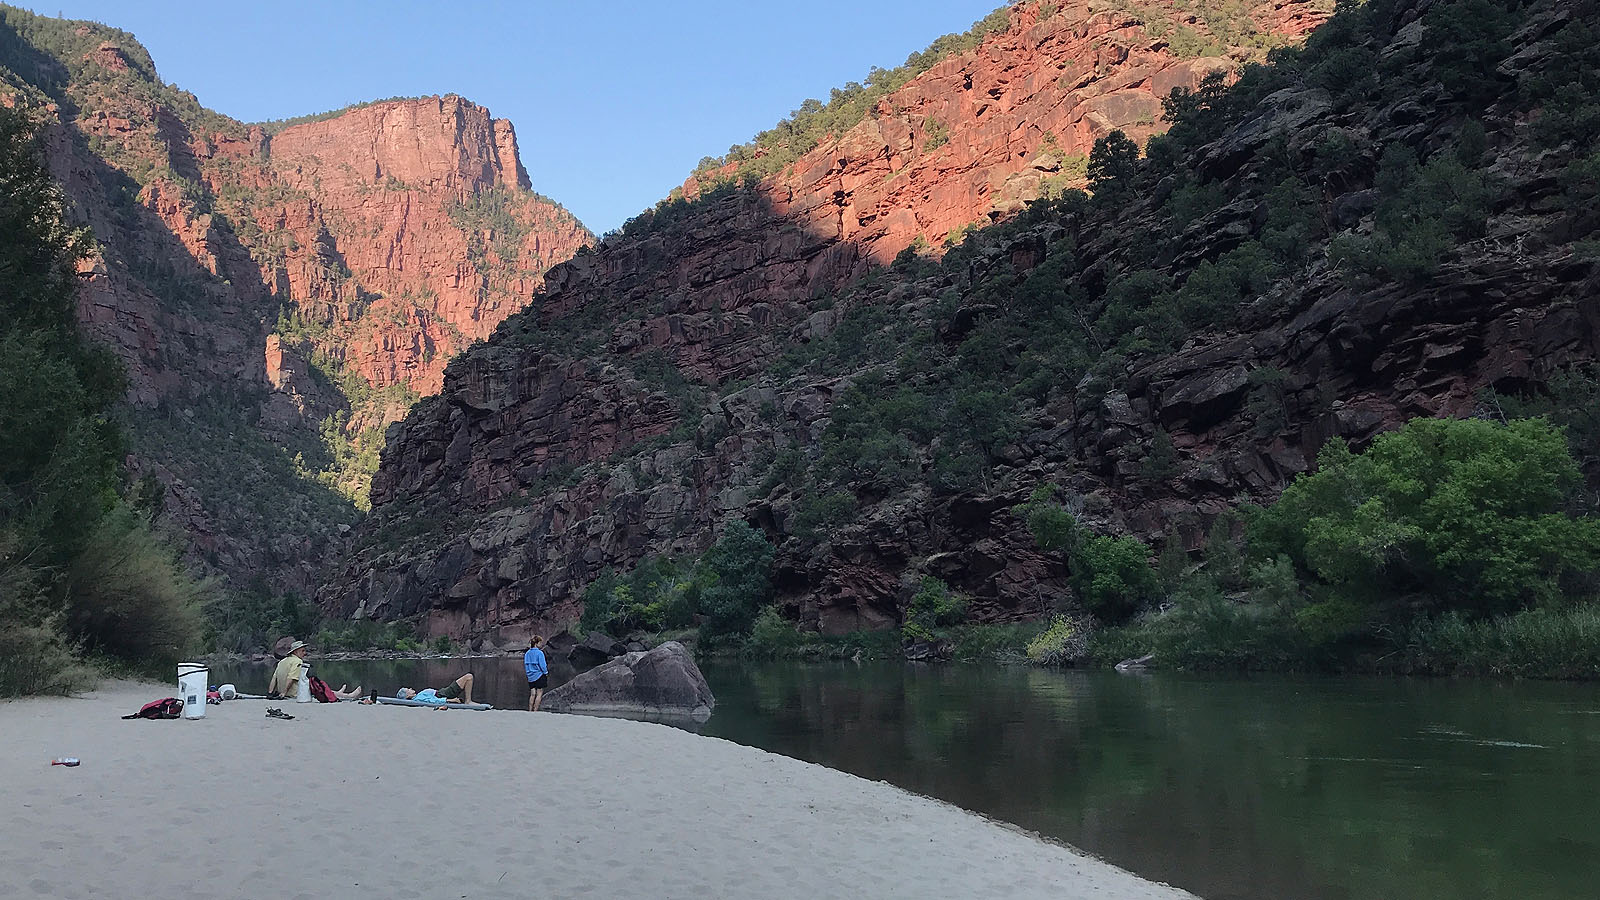 Enjoying some beach time along the Green River in Dinosaur National Monument